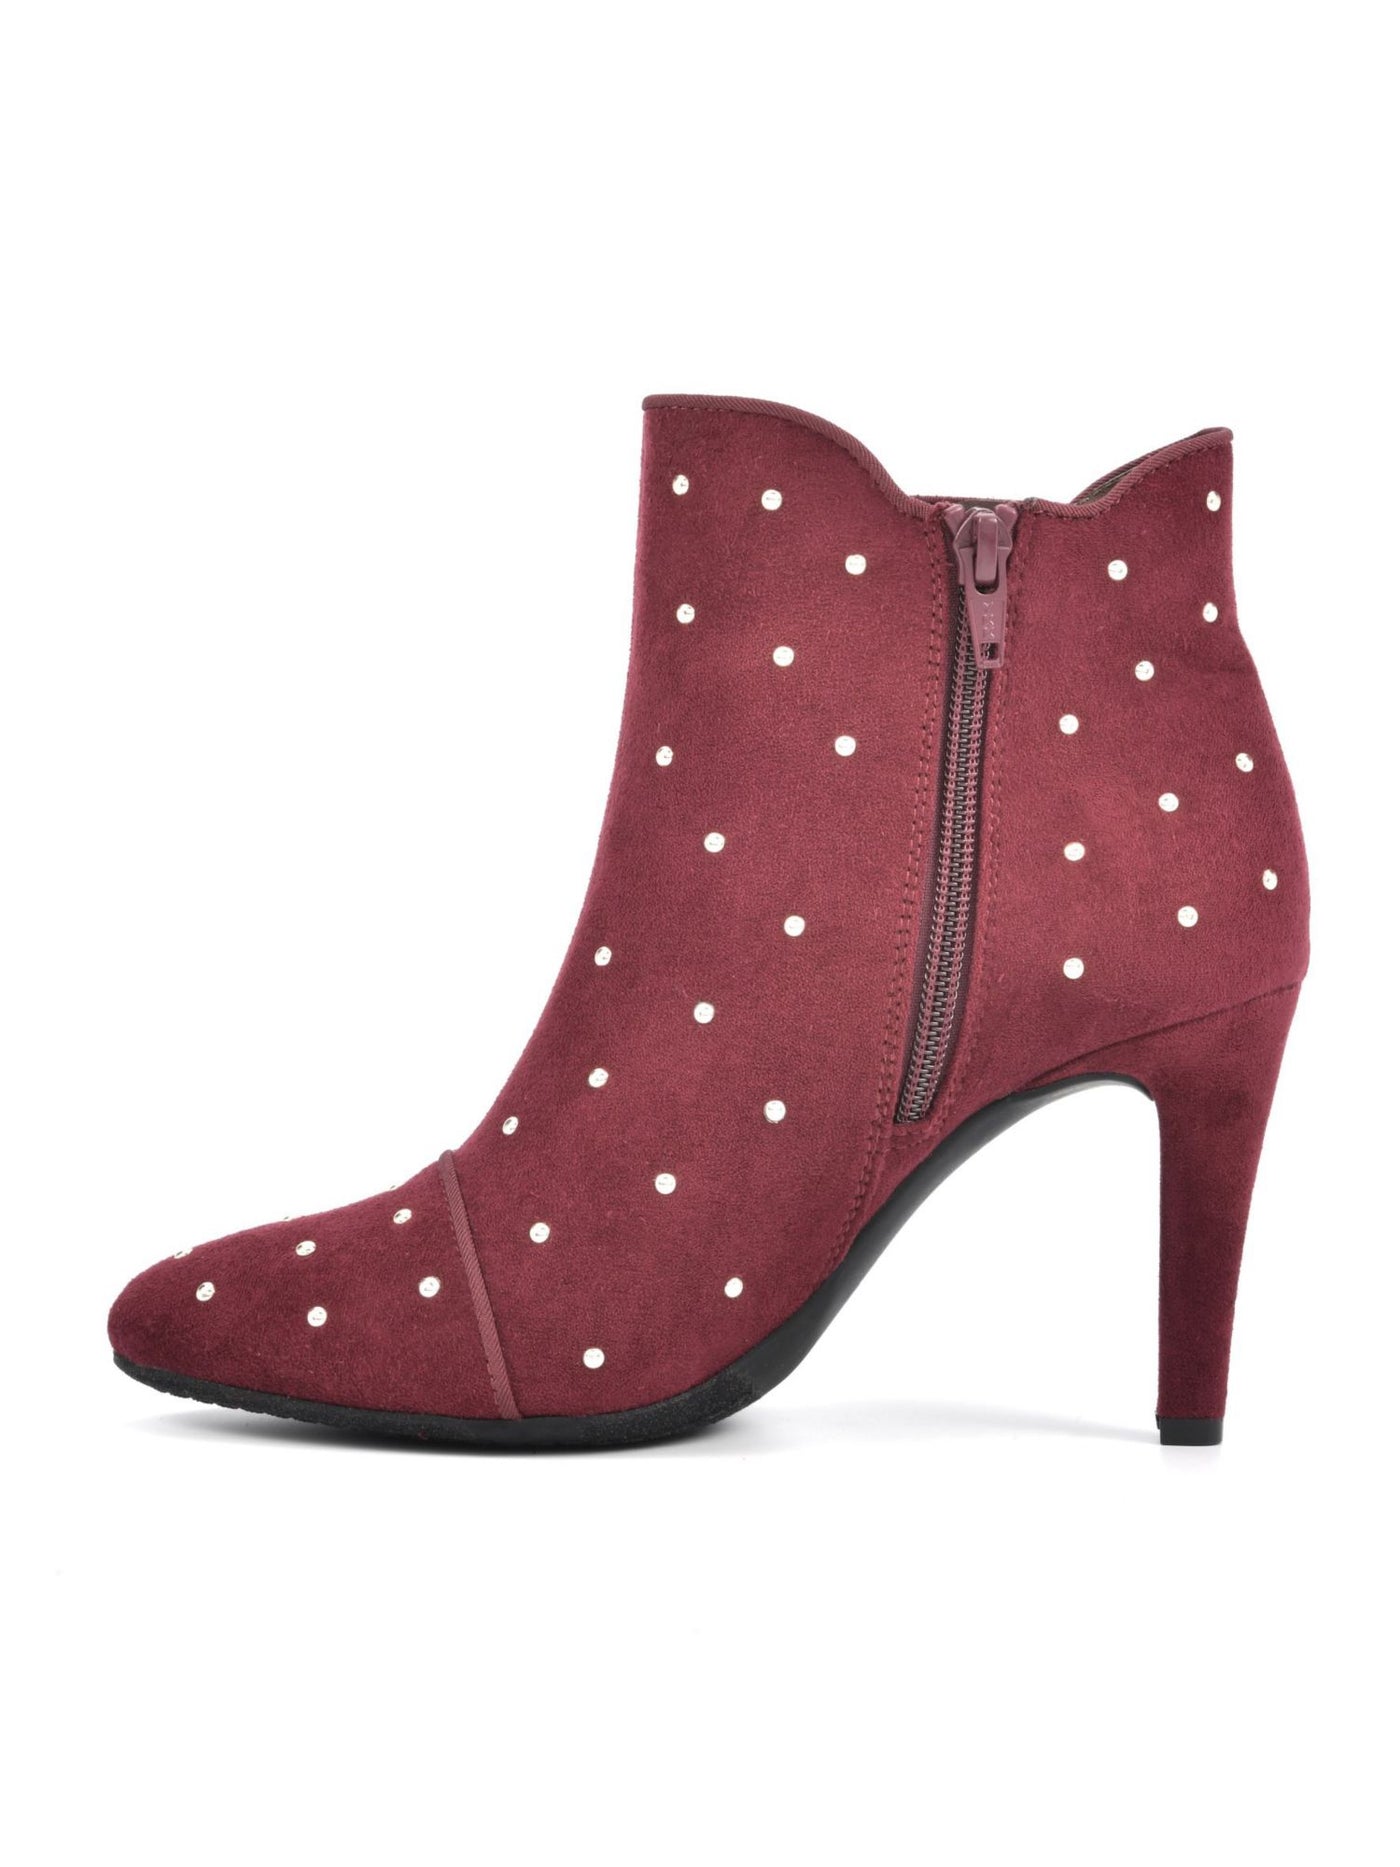 RIALTO Womens Burgundy Studded Pointed Toe Stiletto Zip-Up Dress Booties 7